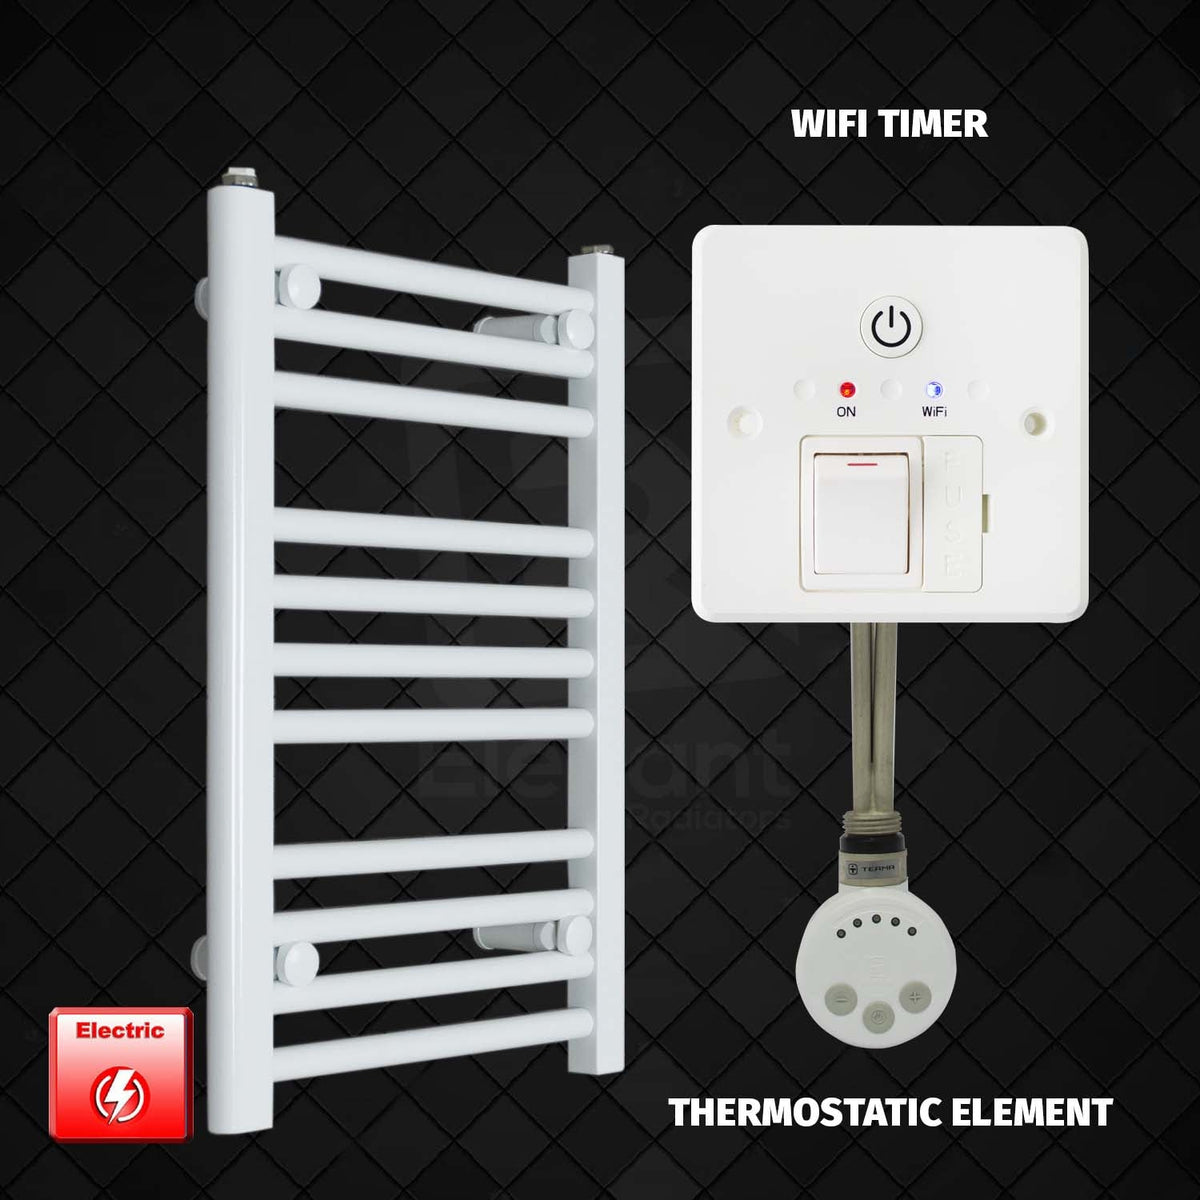 600 mm High 400 mm Wide Pre-Filled Electric Heated Towel Rail Radiator White HTR Thermostatic Element With Wifi Timer